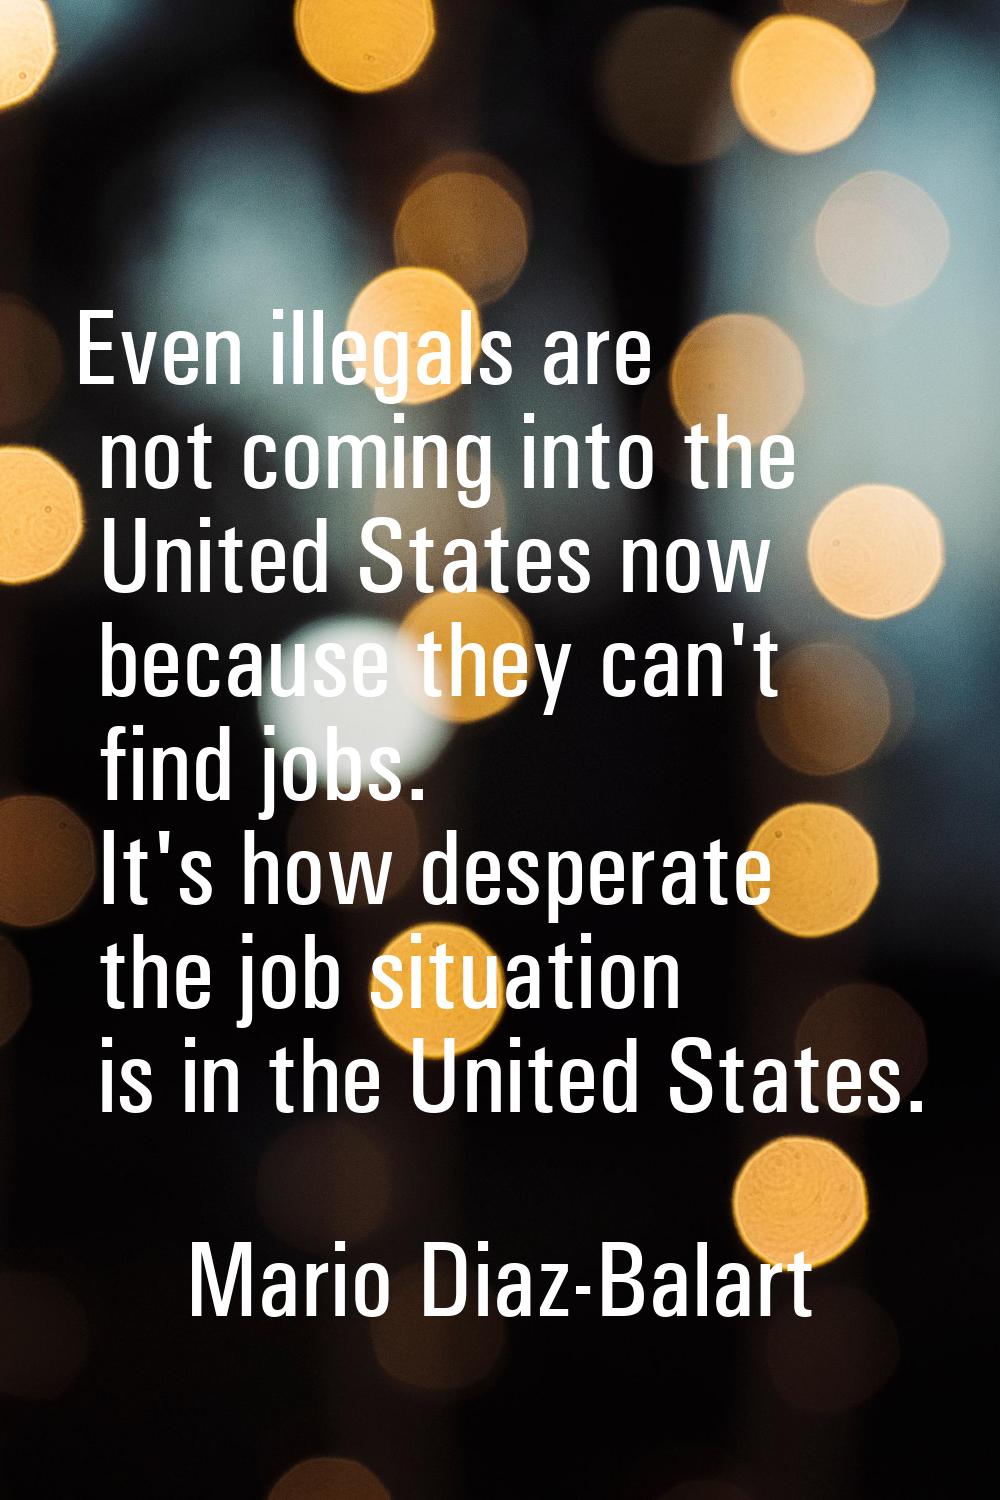 Even illegals are not coming into the United States now because they can't find jobs. It's how desp